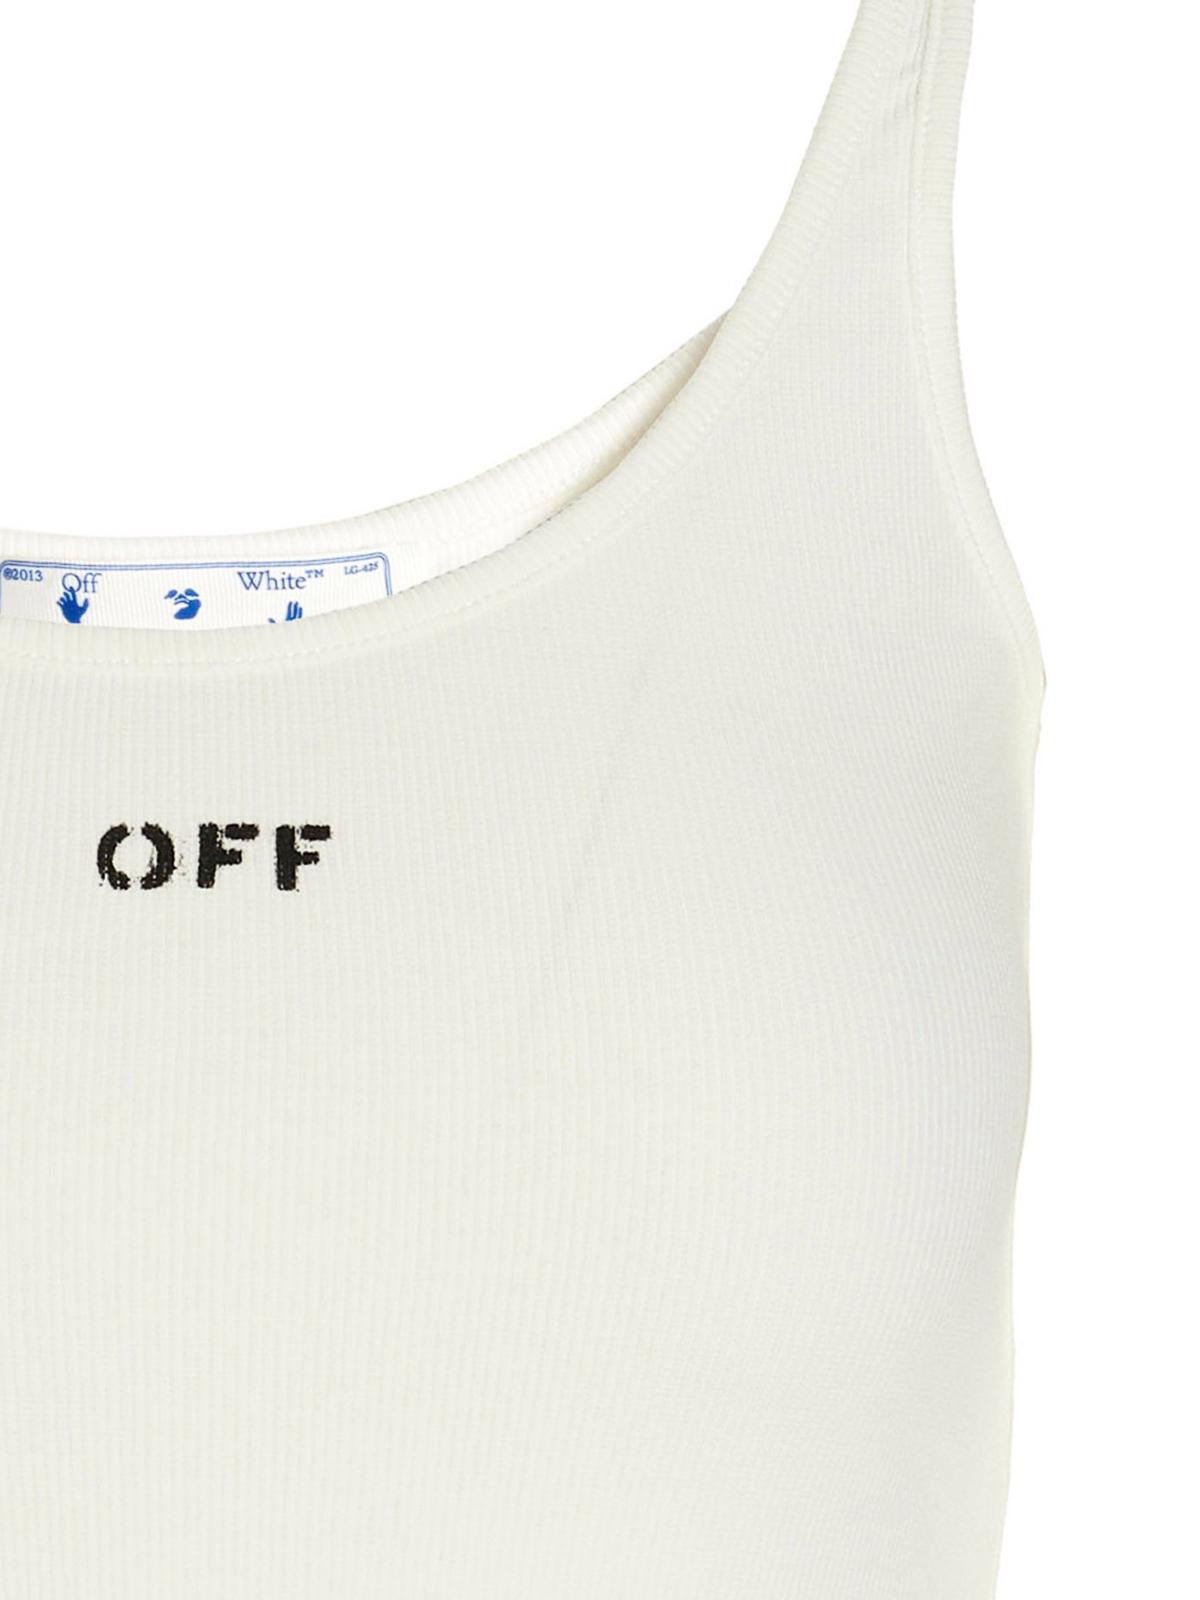 Tops & Tank tops Off-White - Top with front logo - OWAD072C99JER0010110